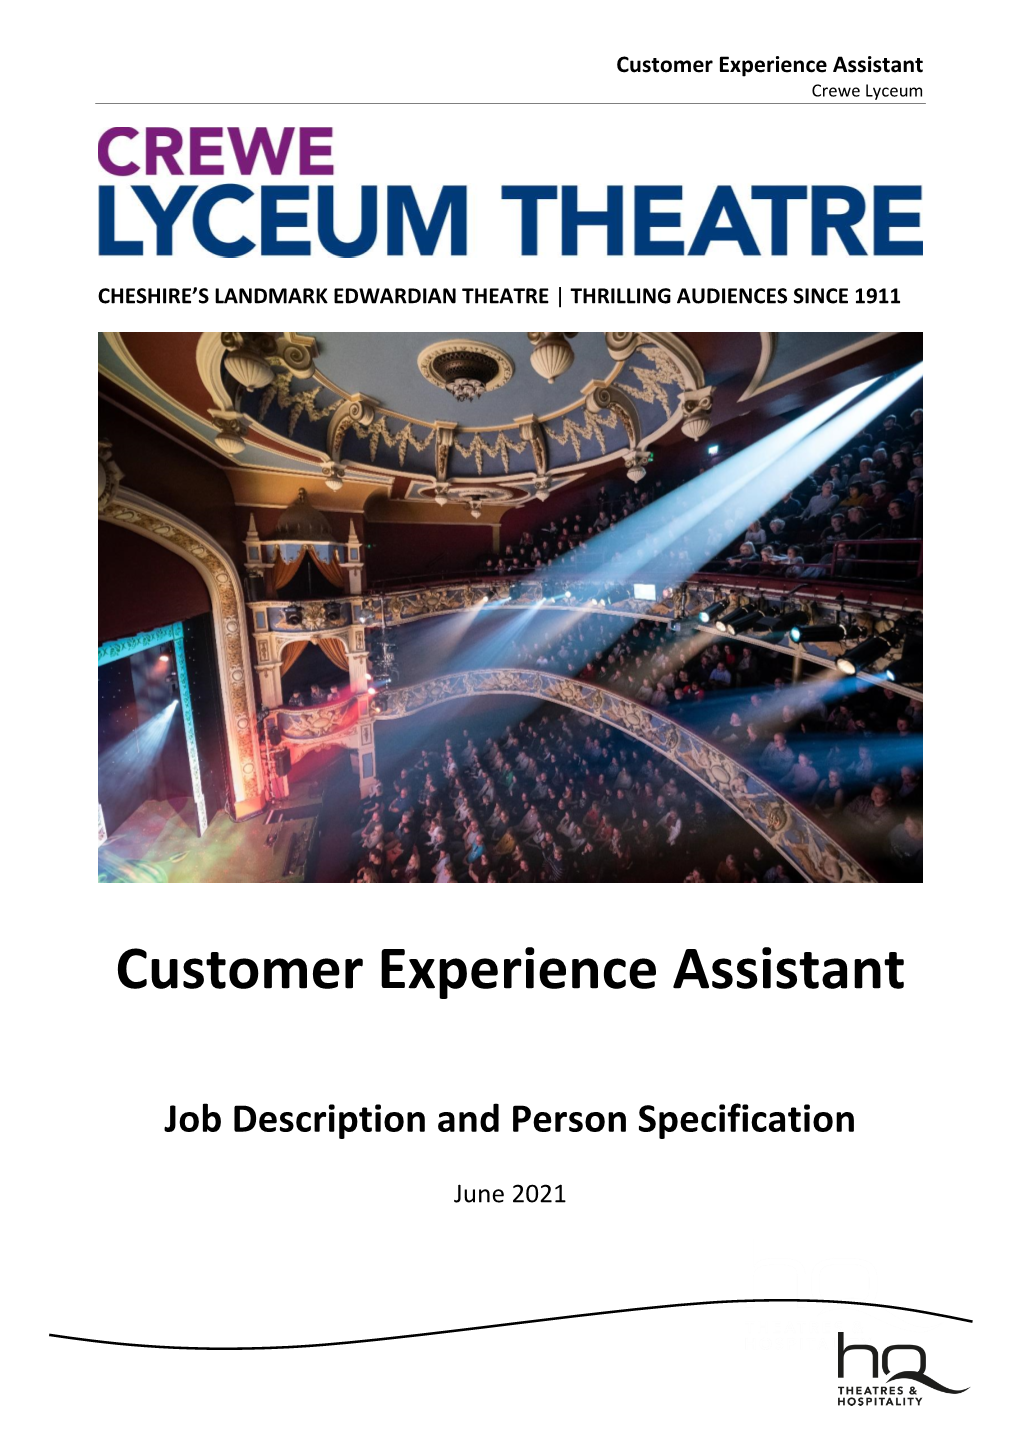 Customer Experience Assistant Crewe Lyceum